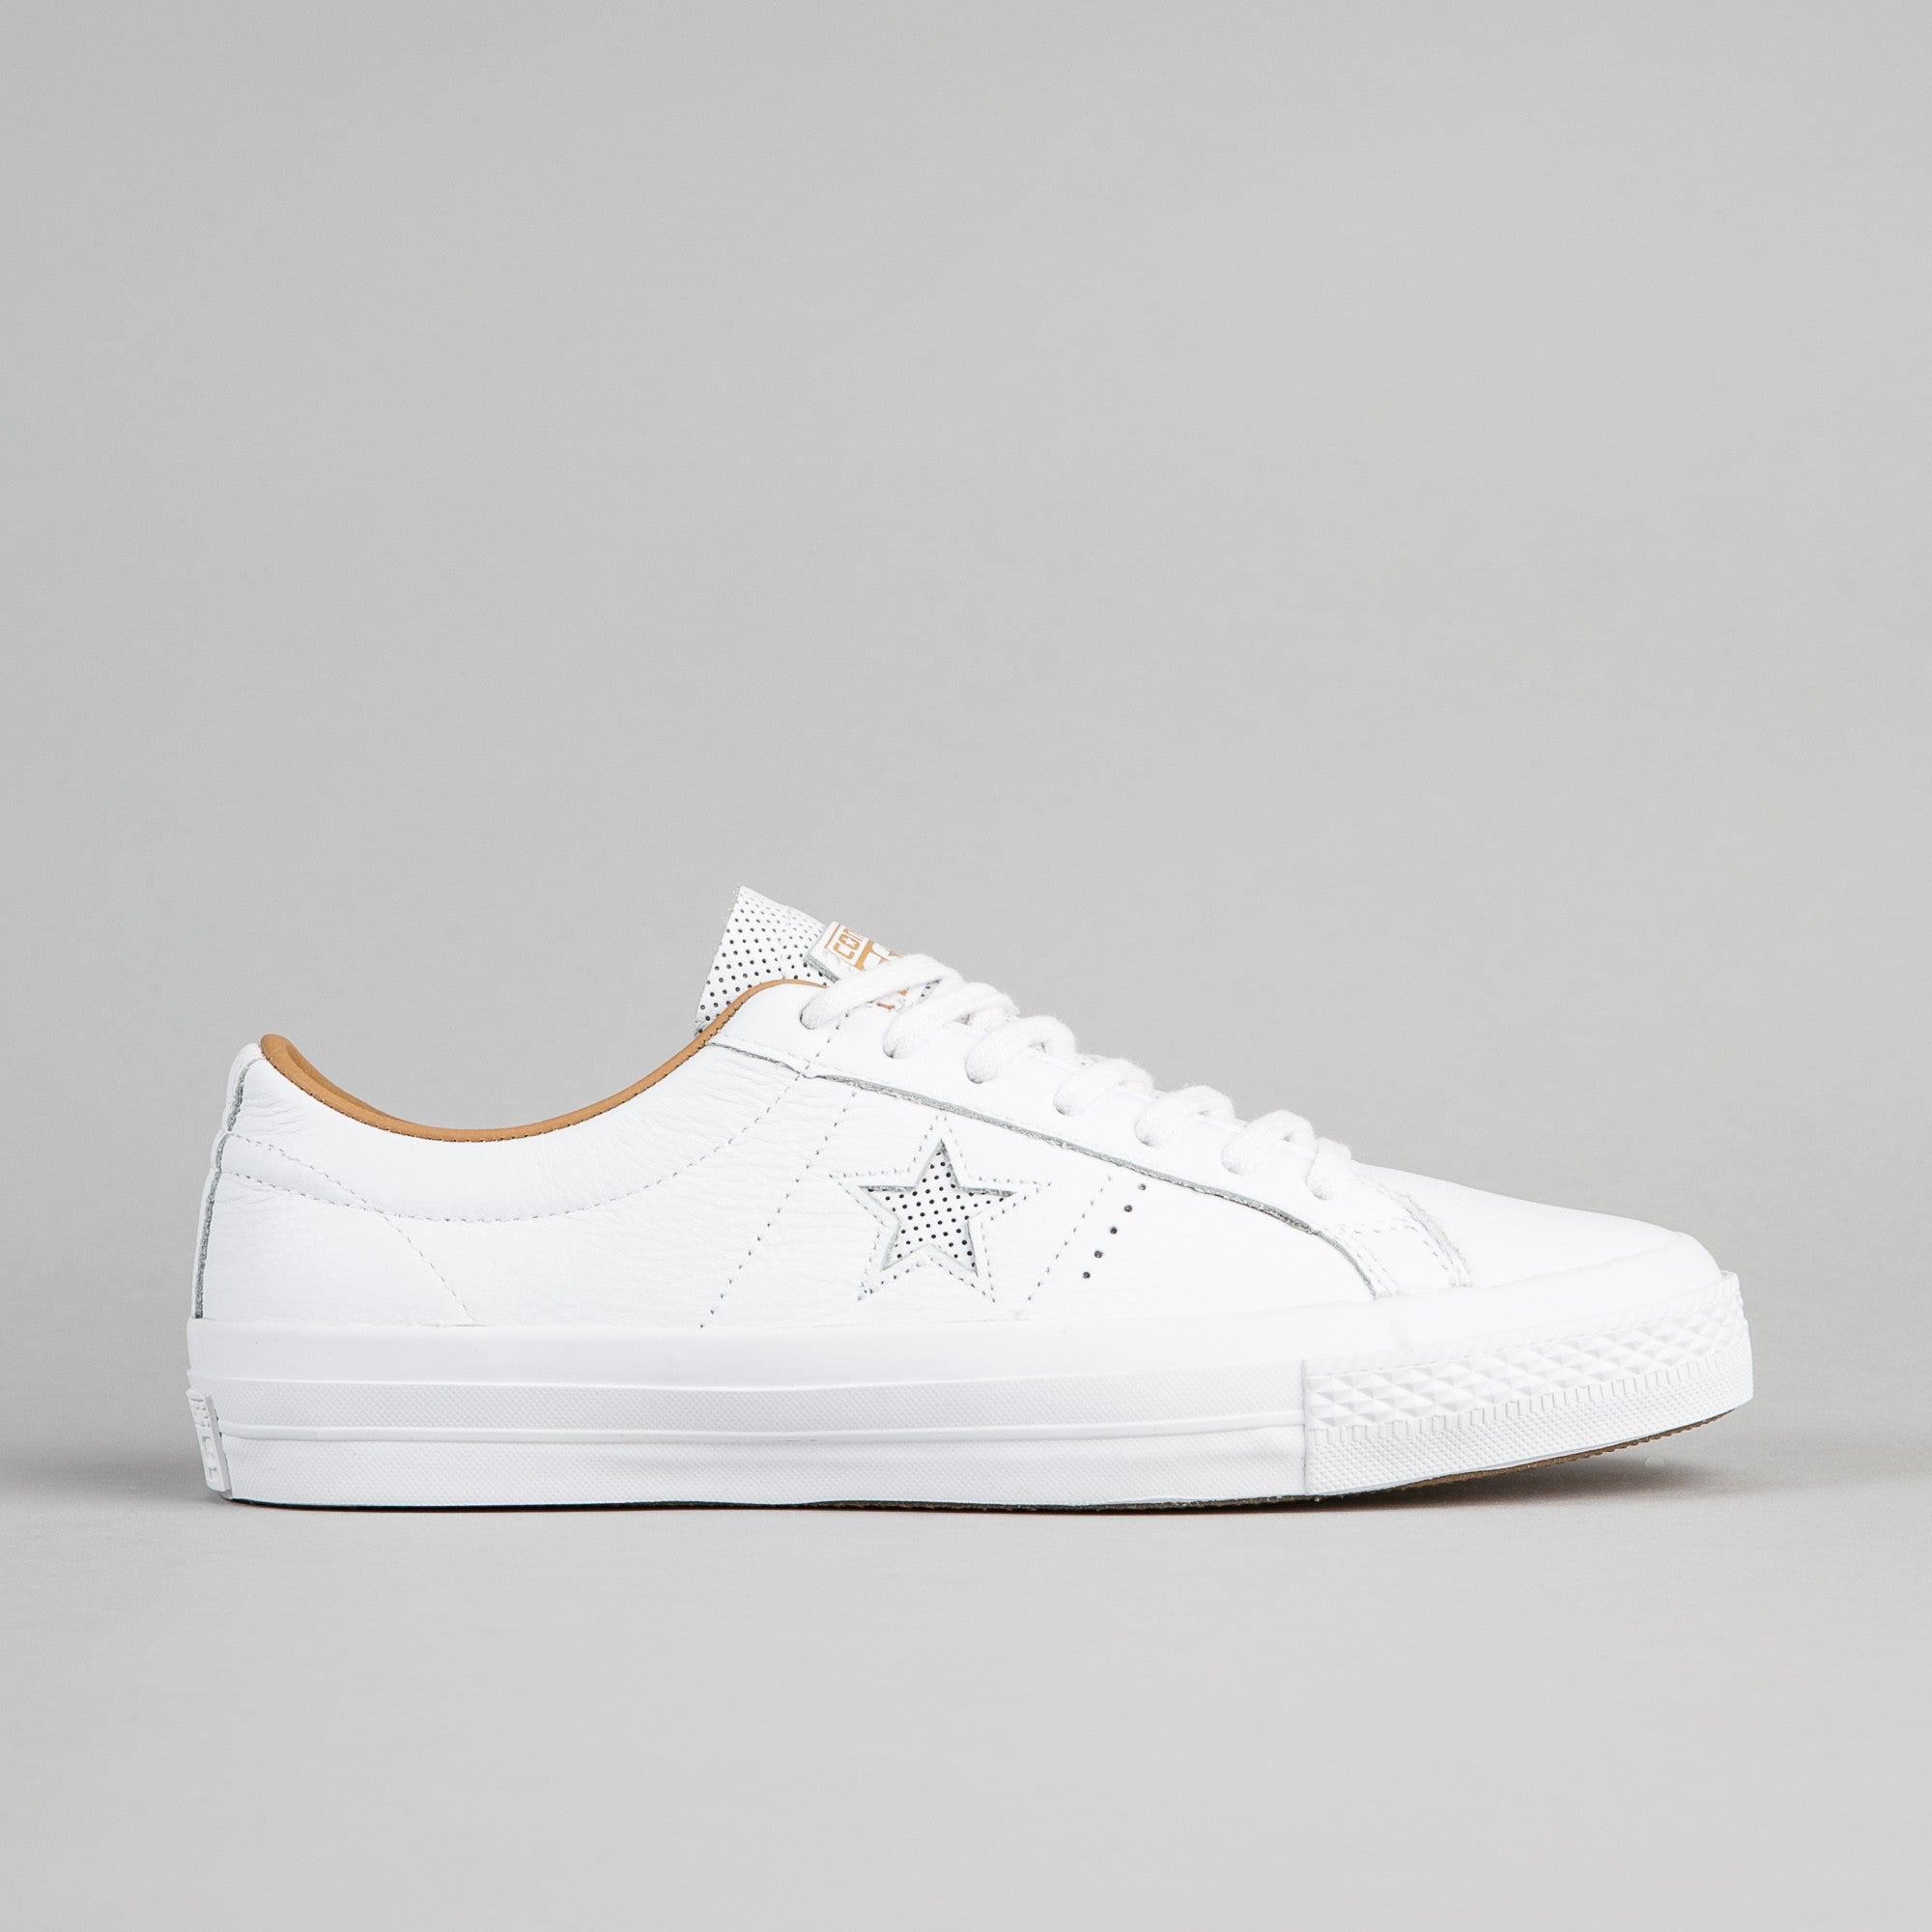 Converse One Star Leather OX Shoes 